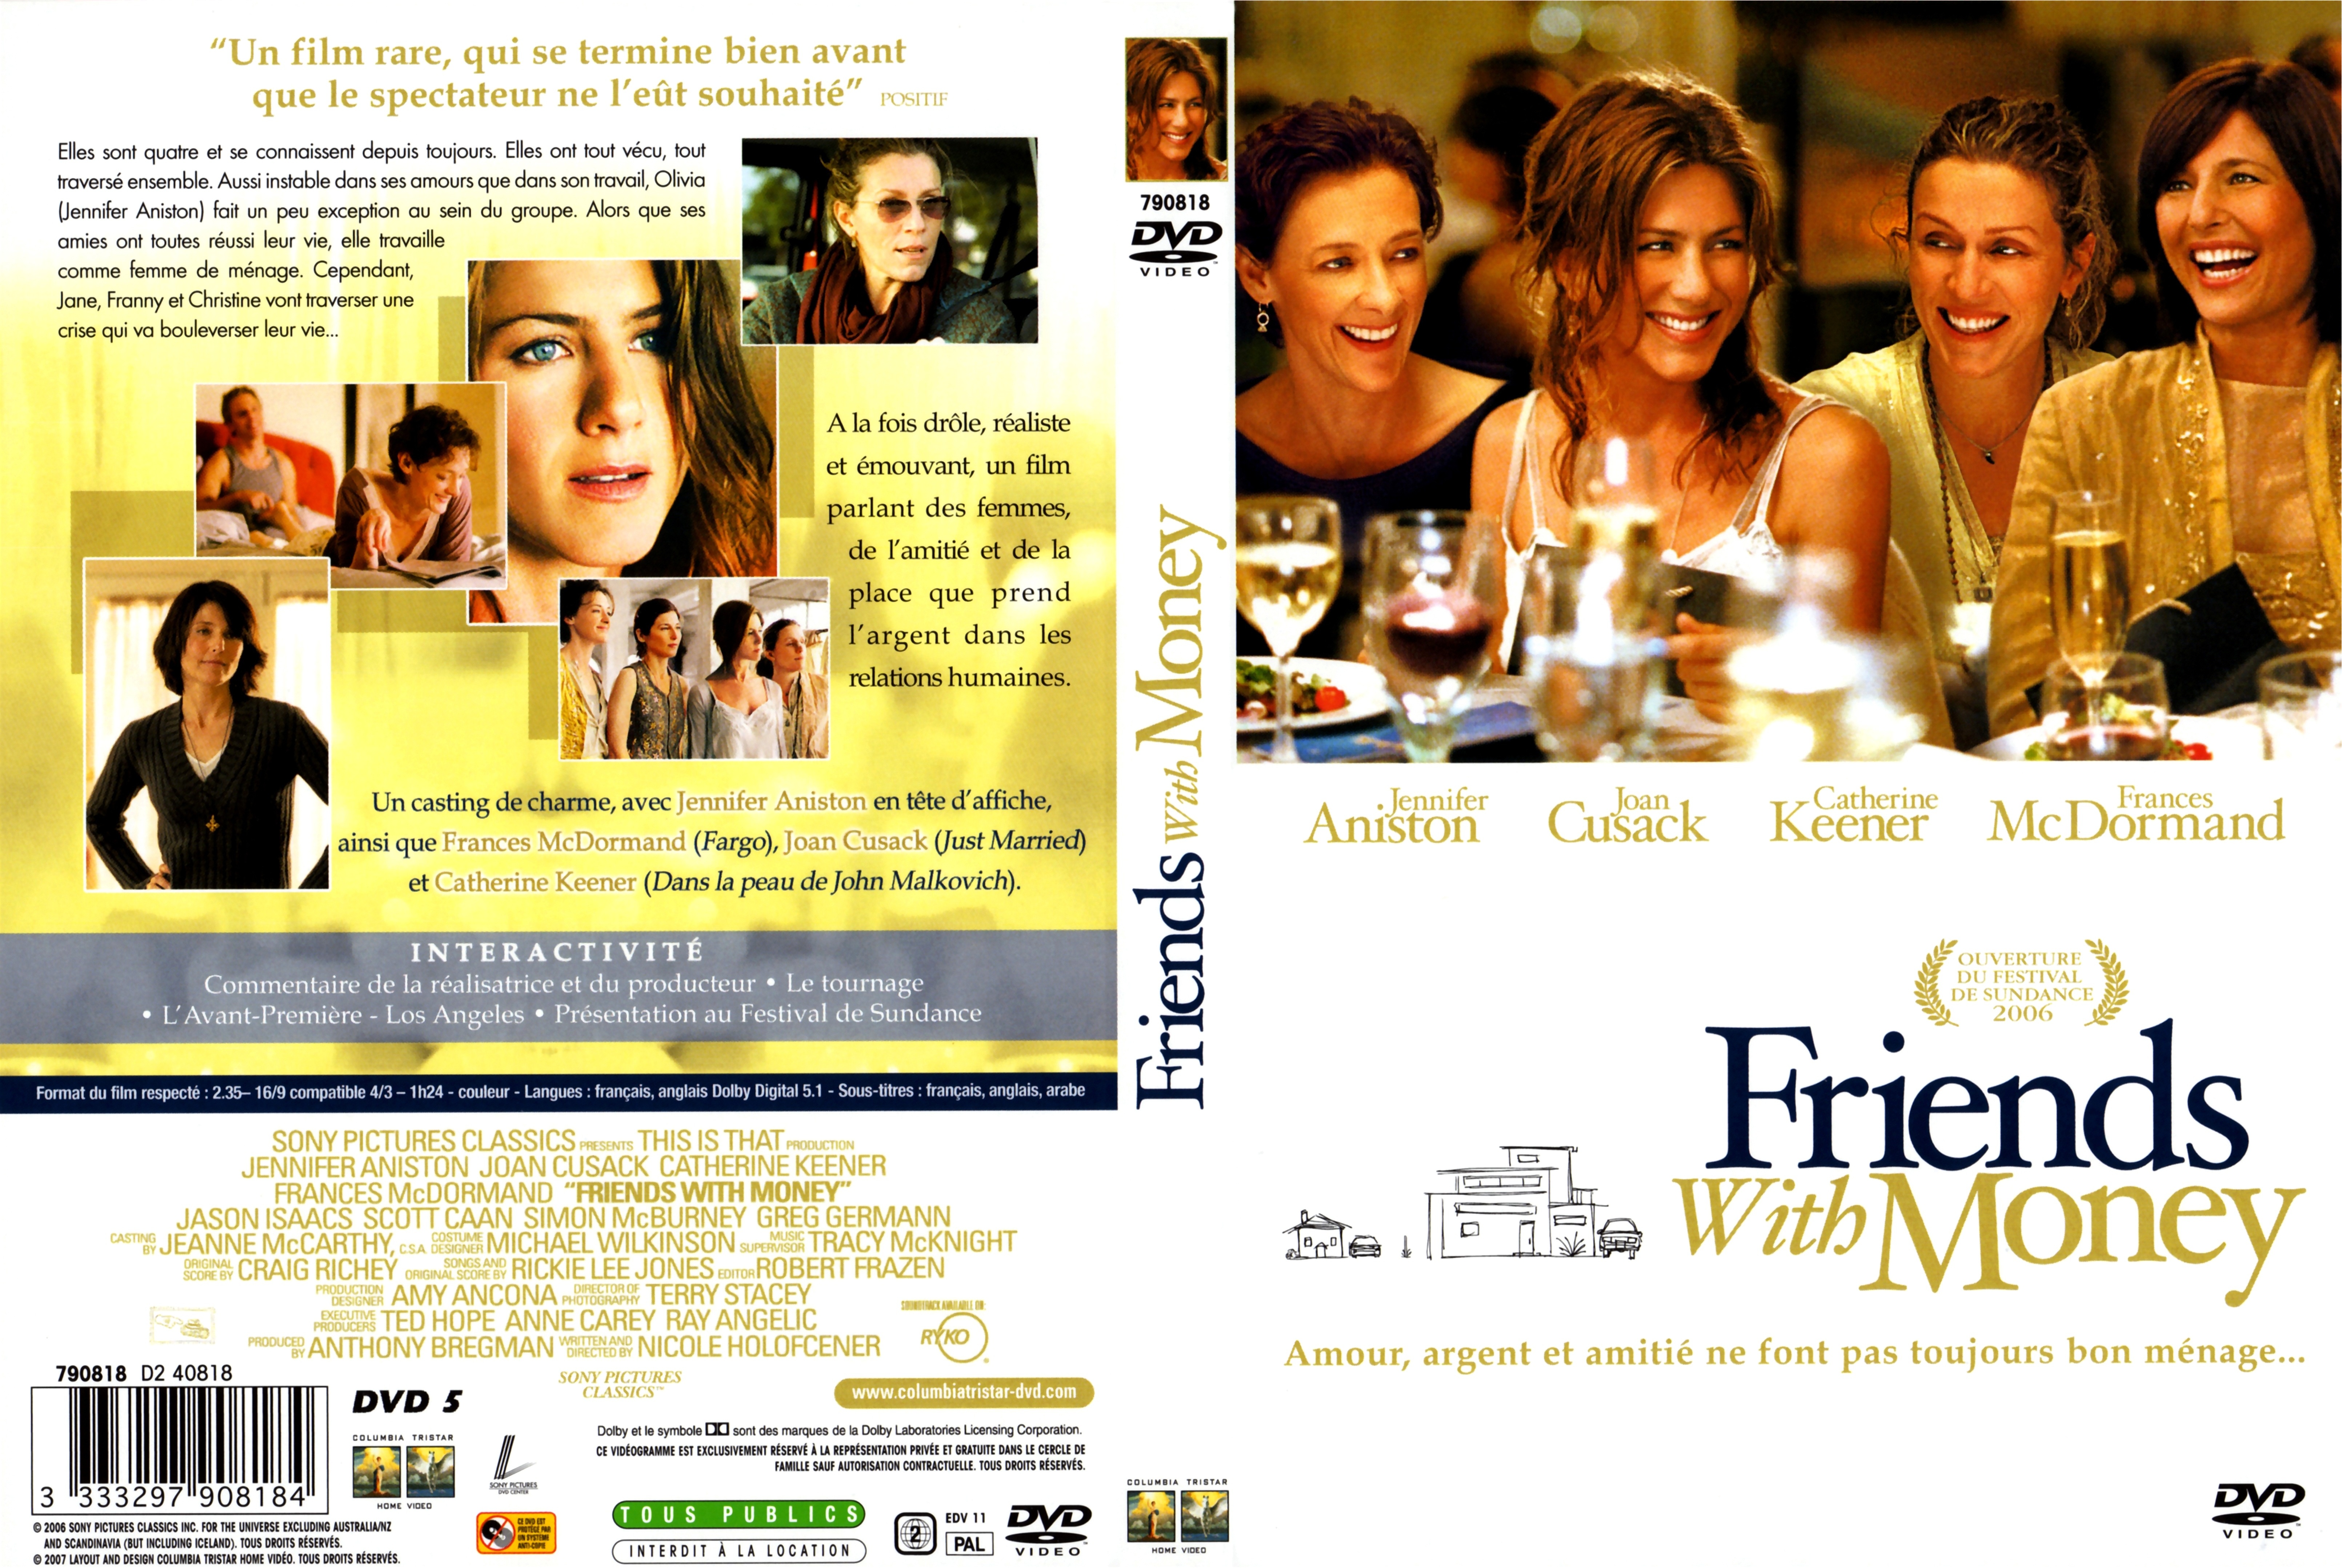 Jaquette DVD Friends with money v2